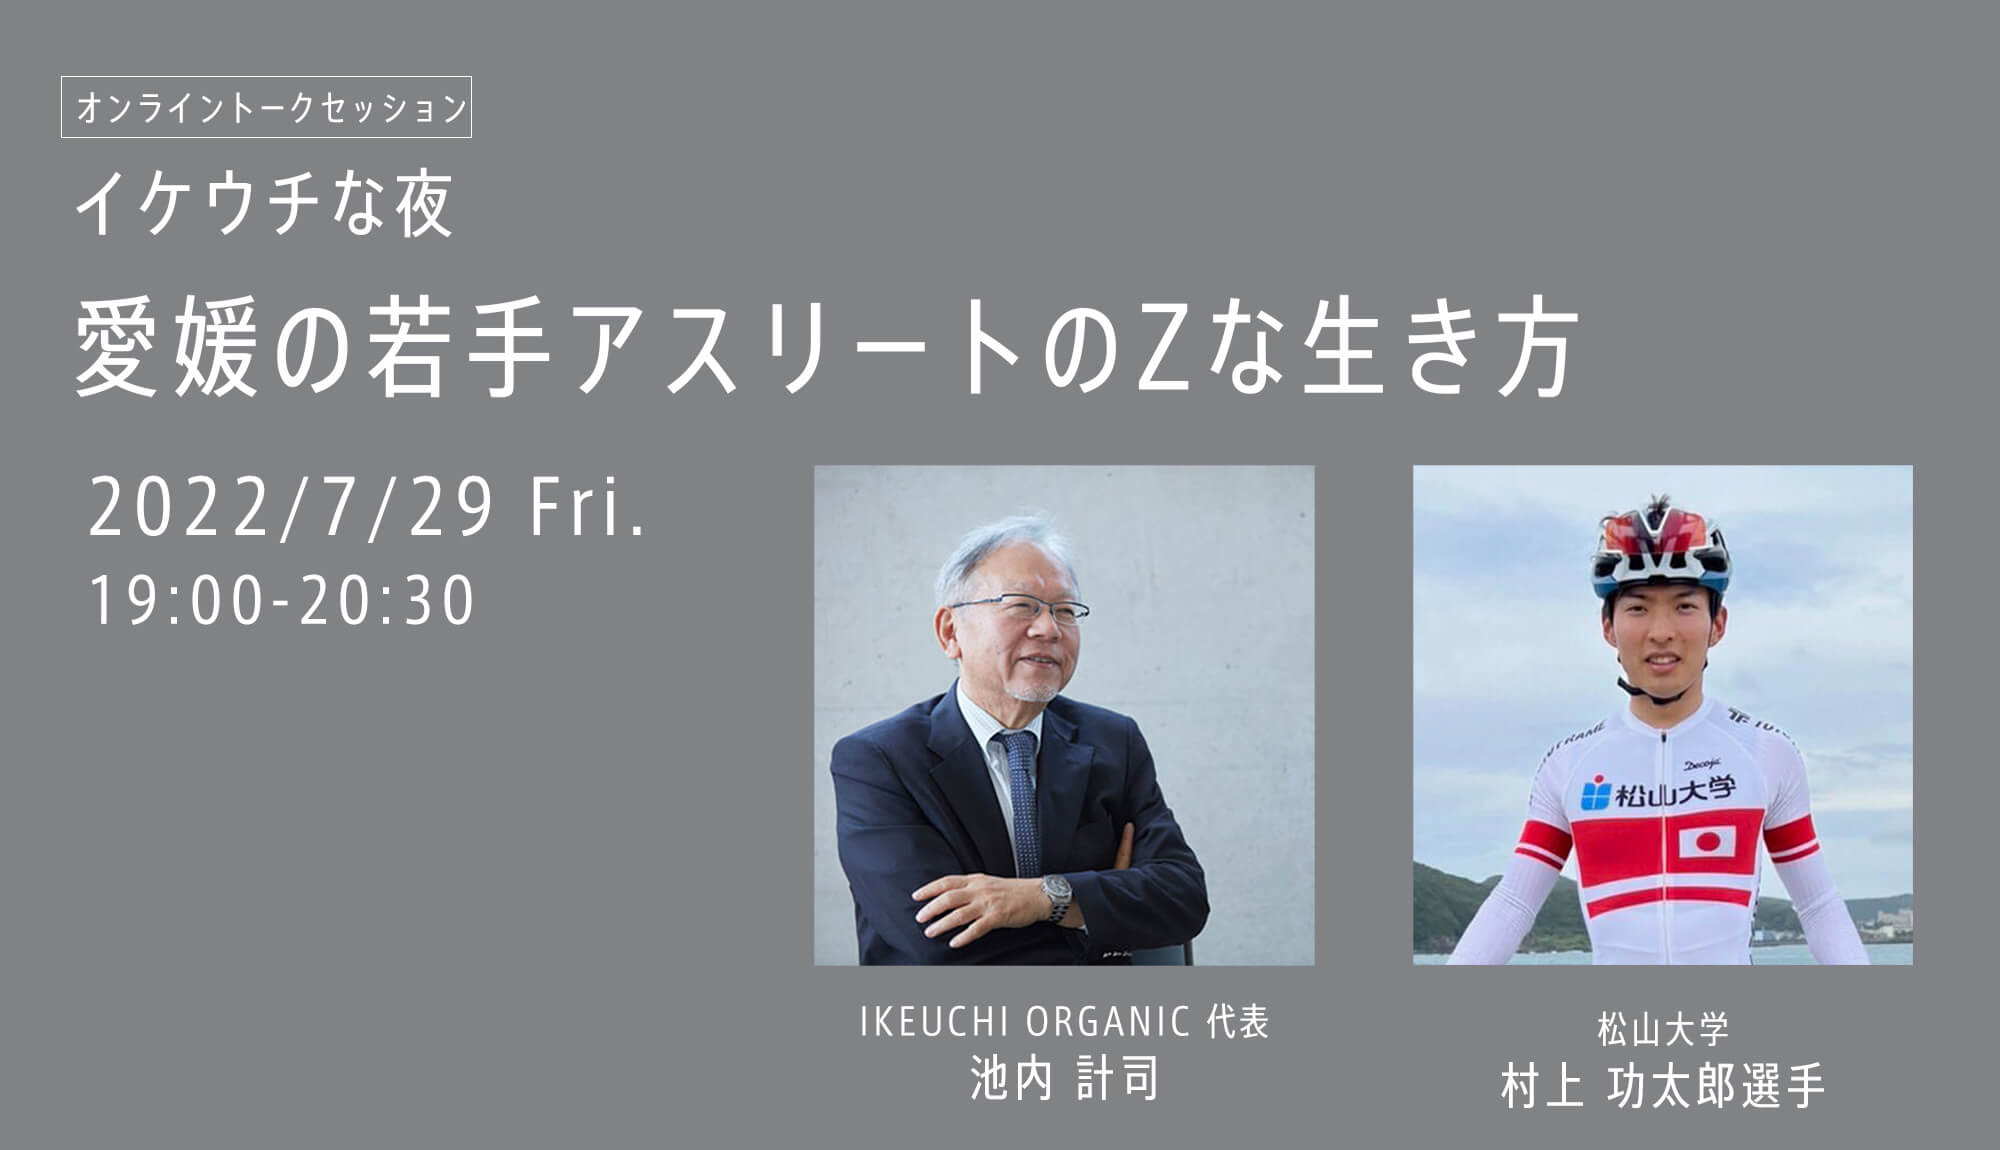 Announcement of Ikeuchi-no-Yoru Session.1 “Z way of life of young athletes in Ehime”.